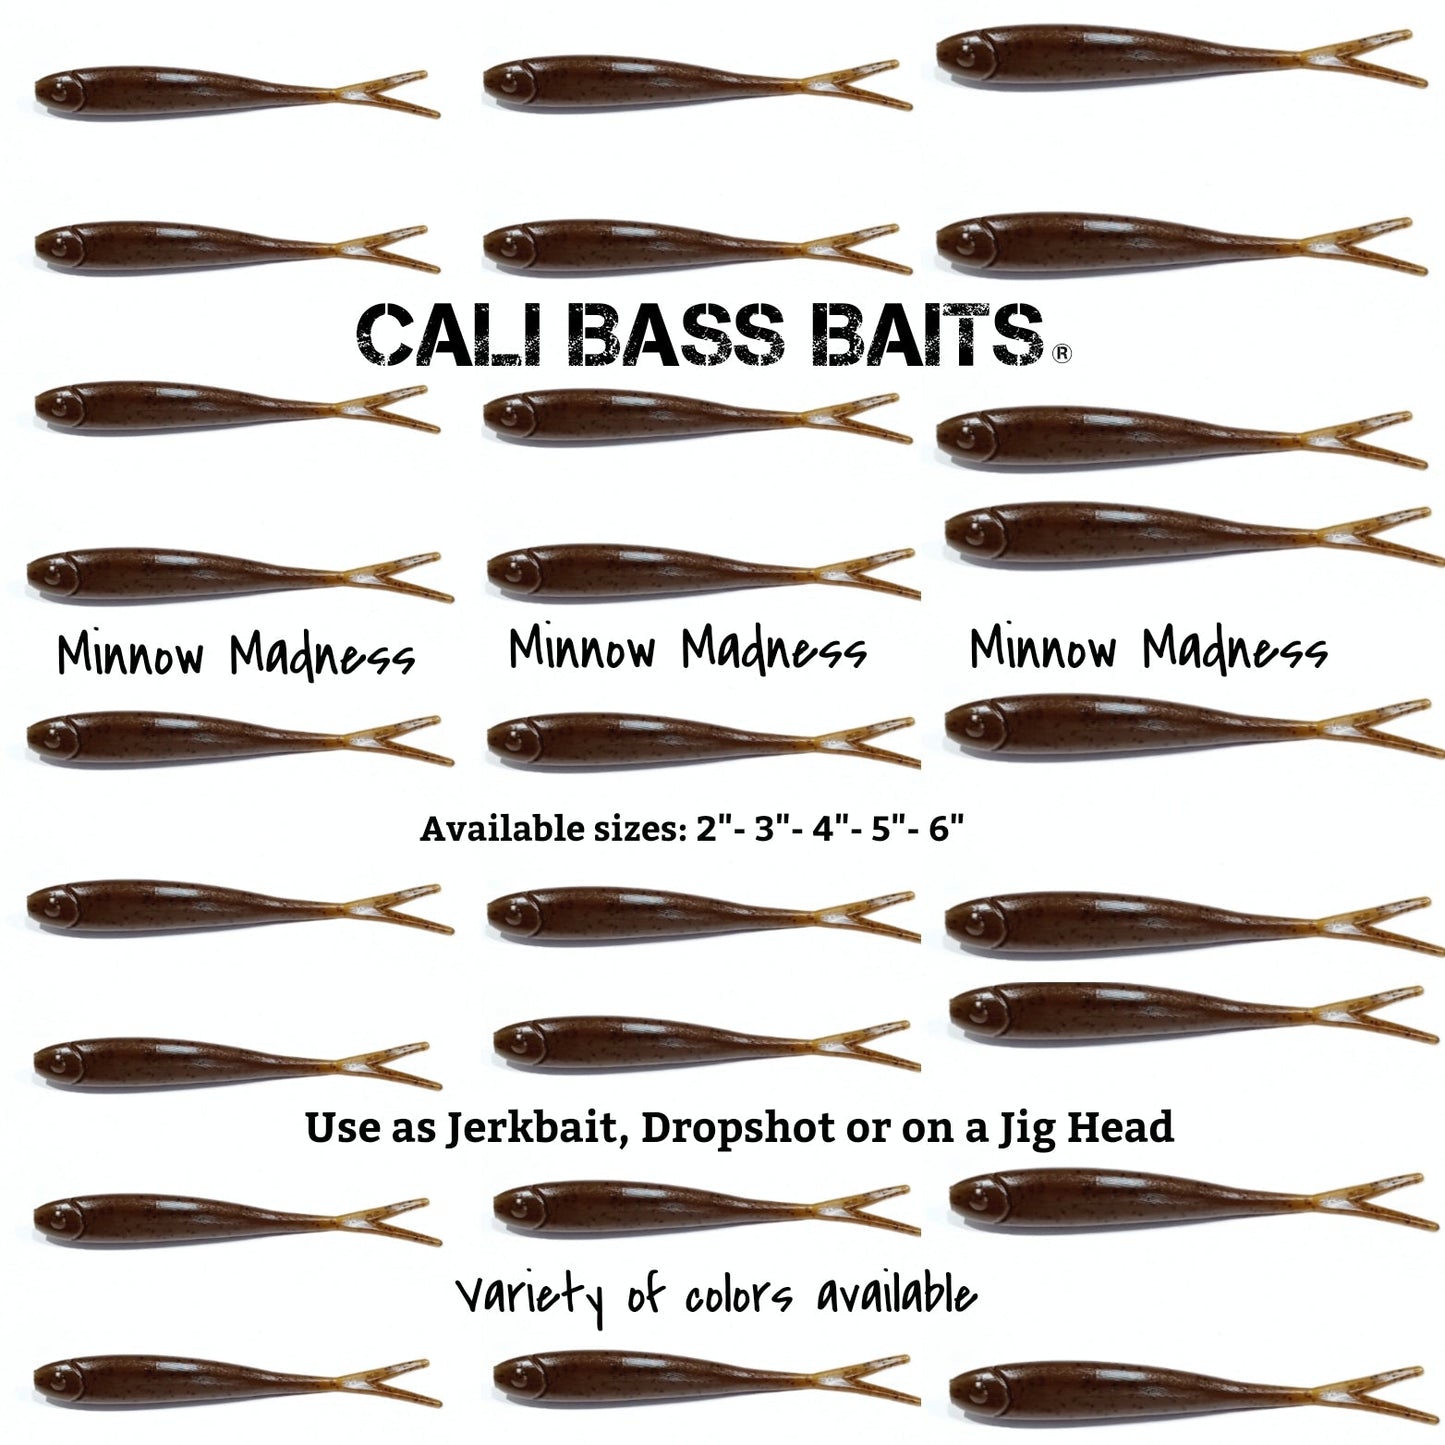 Big Bite Baits Fishing Lures - The Big Bite Baits Minnow Head Jig! You know  you need these! #bigbitebaits #crappie #crappiefishing #fishing #panfish